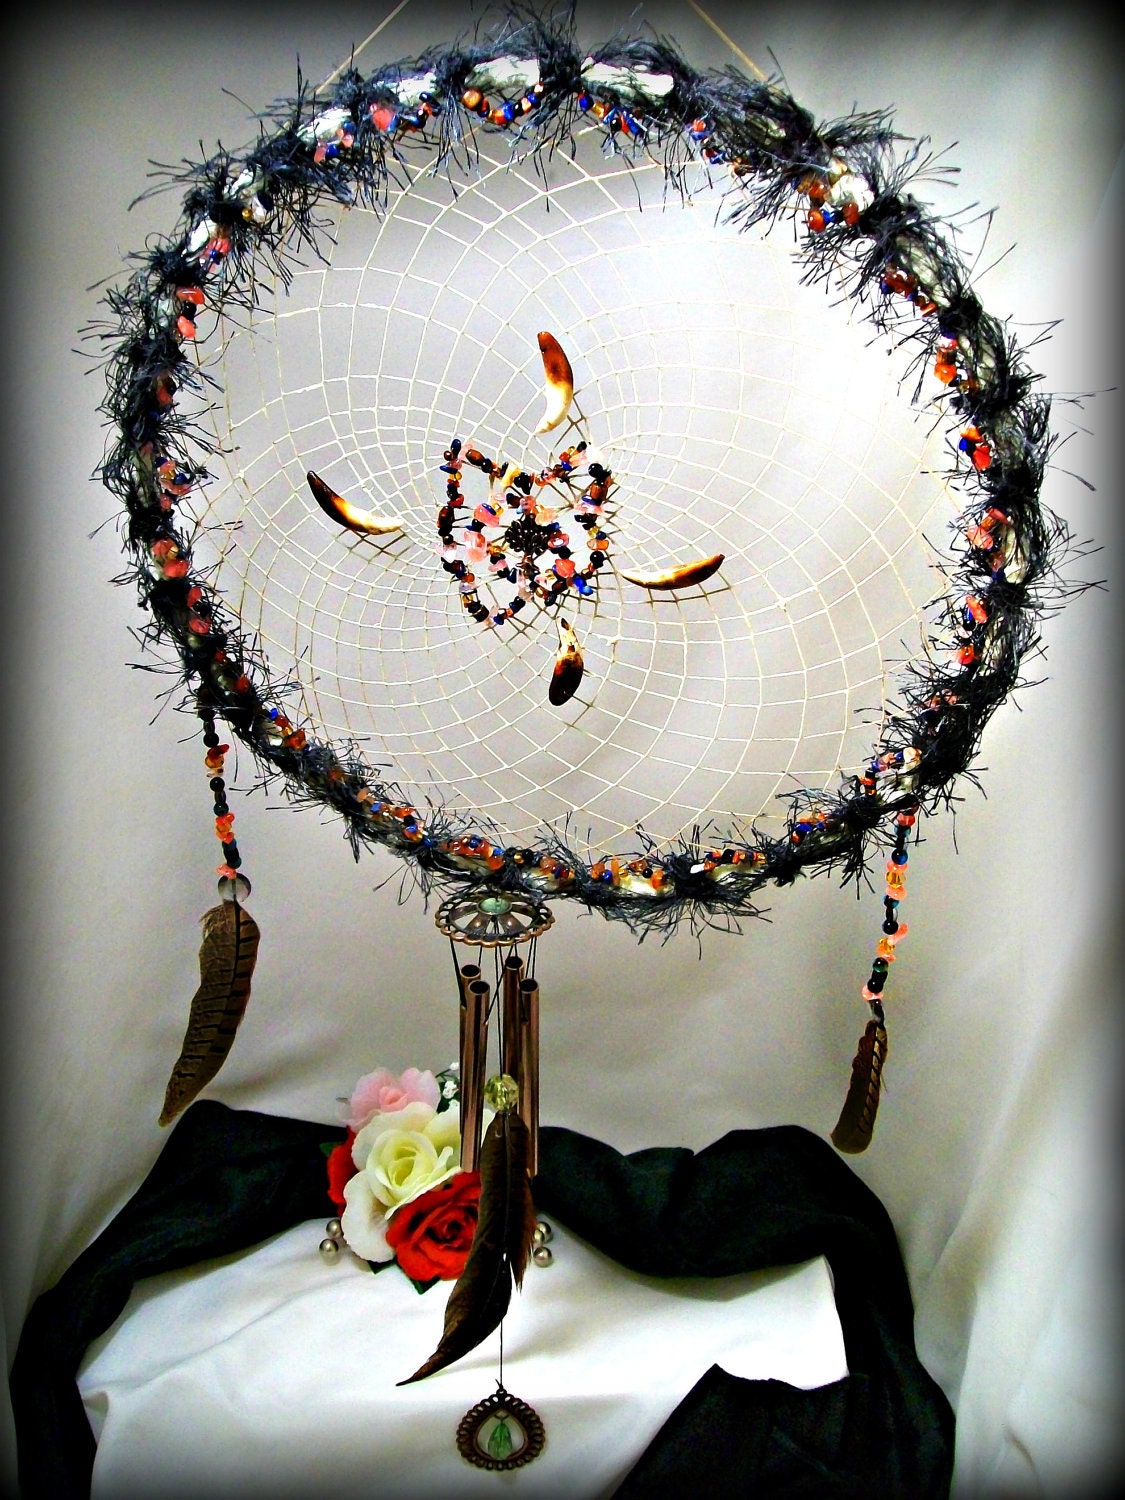 Circle of Life Glow in the Dark Dreamcatcher Window Chime